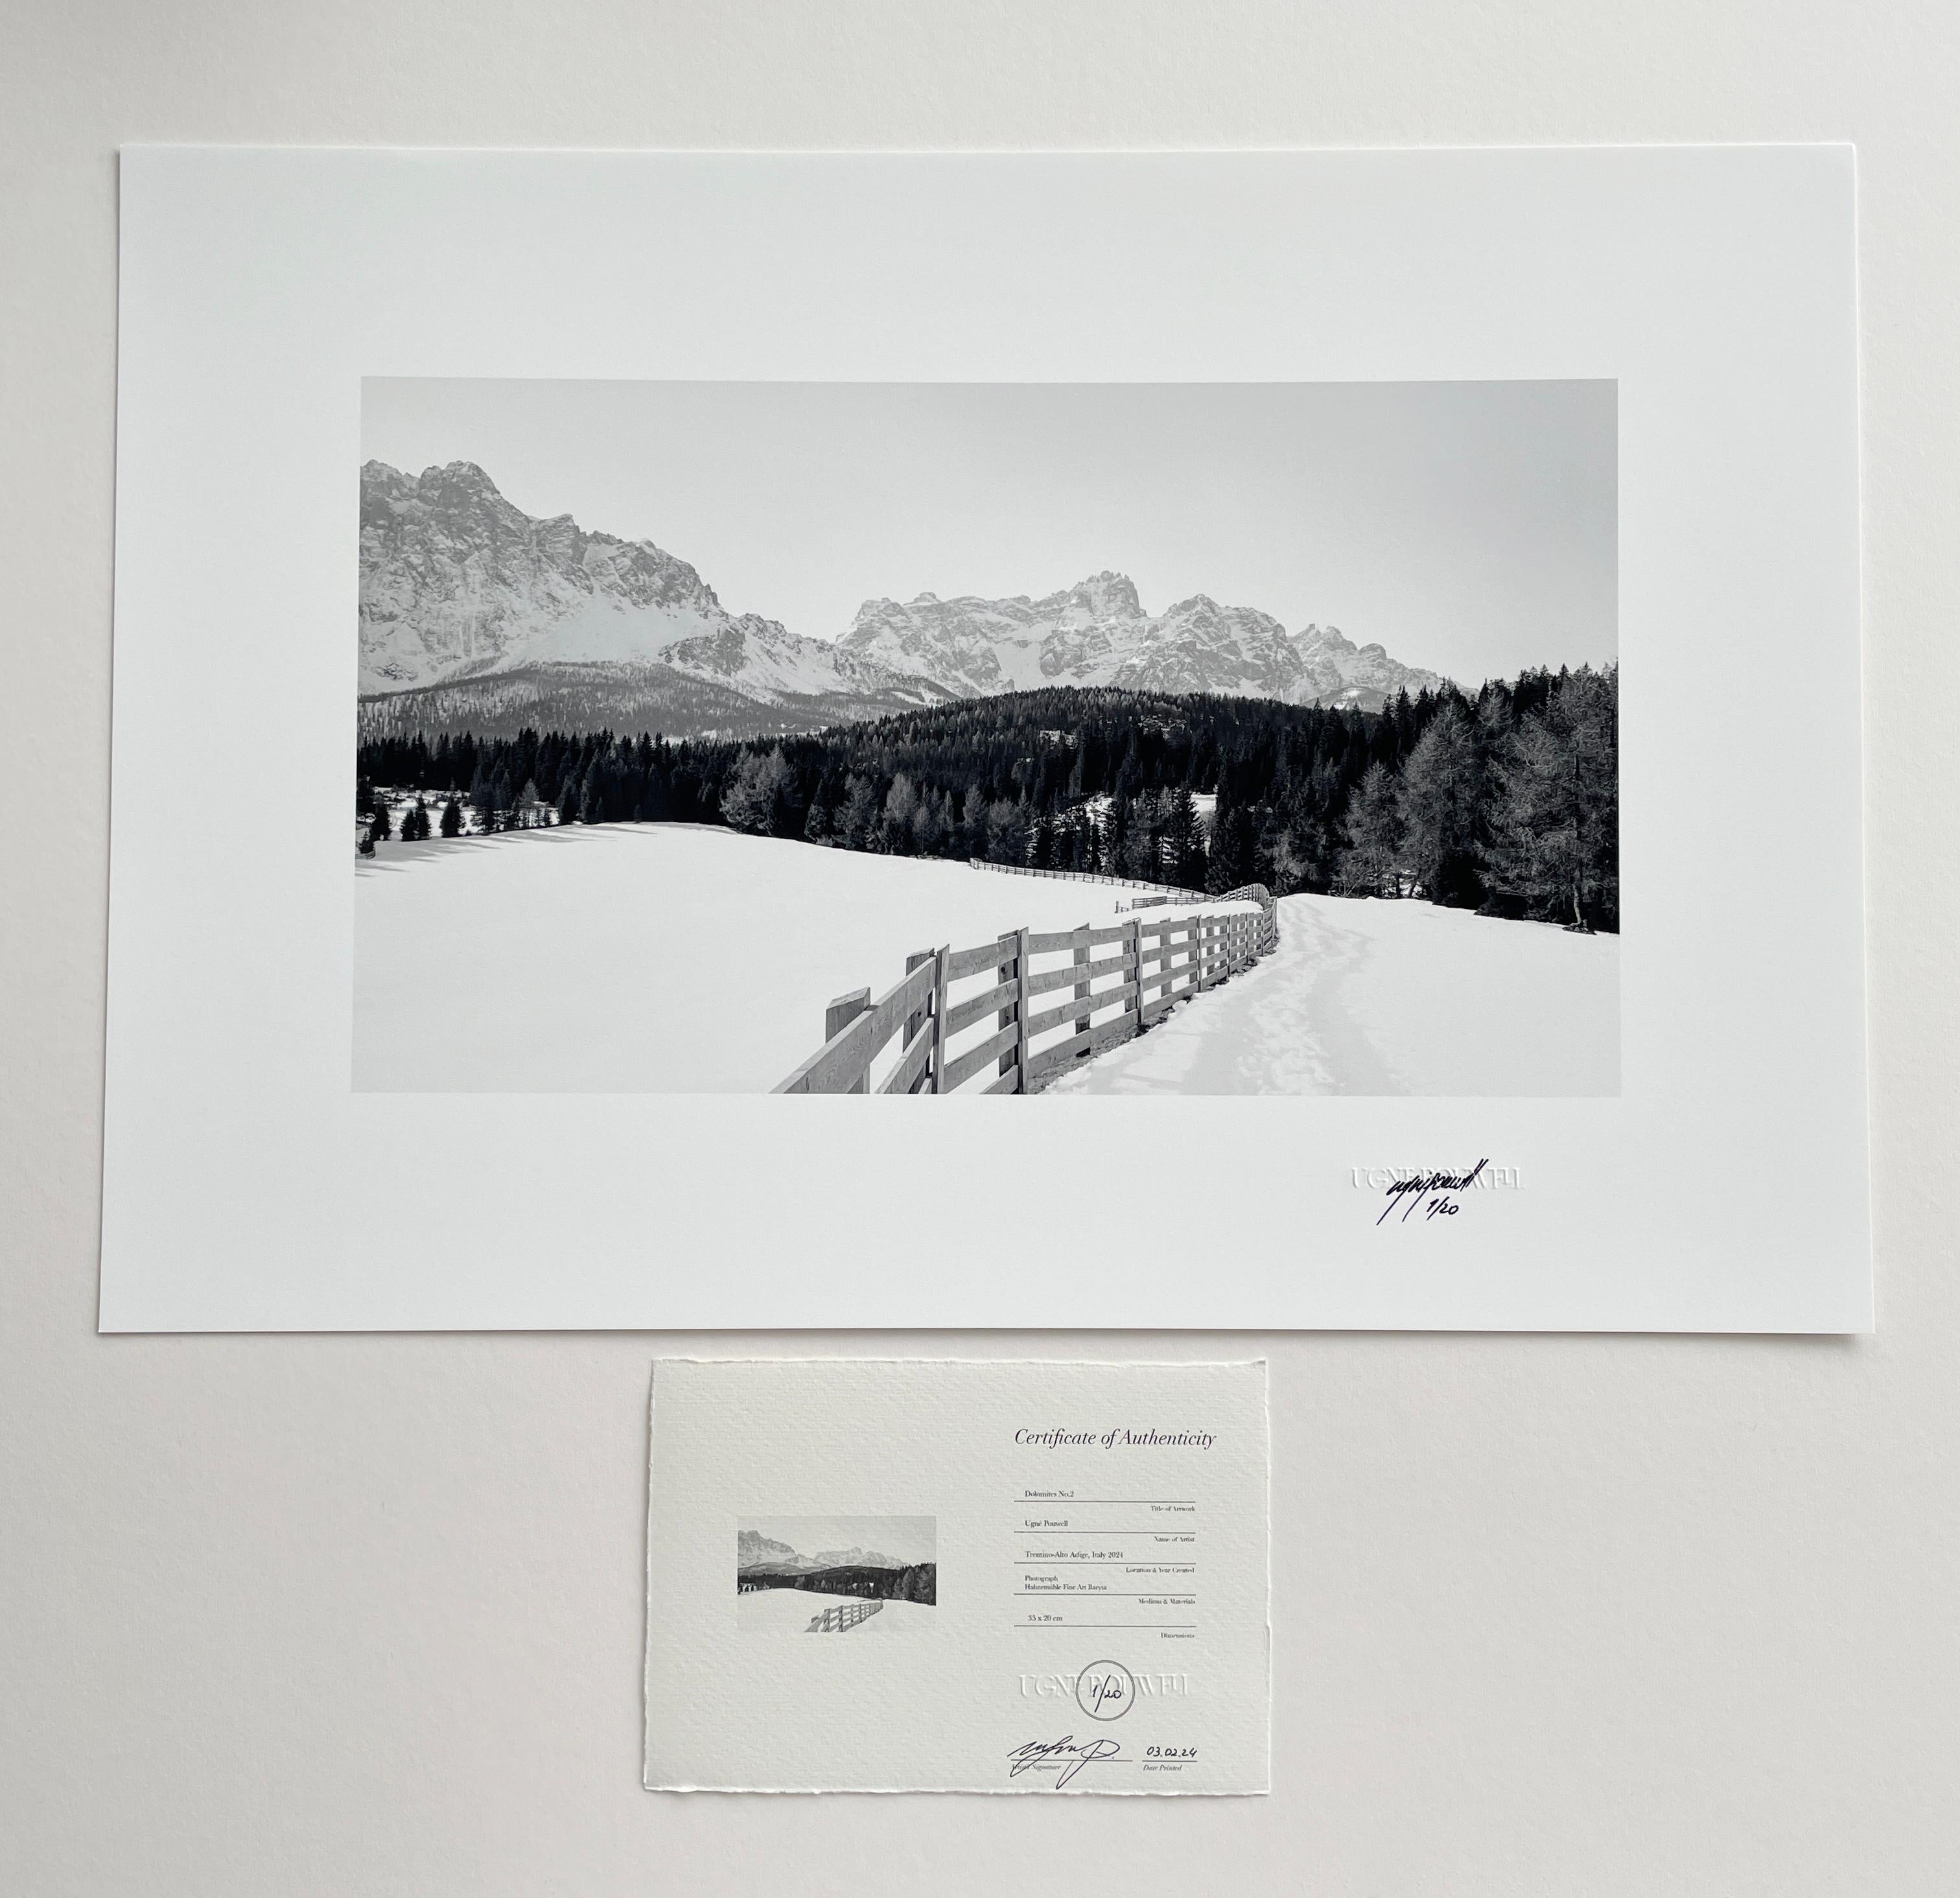 Dolomites No.2, Analogue Black and White Mountain Photography, Ltd. 20 For Sale 3